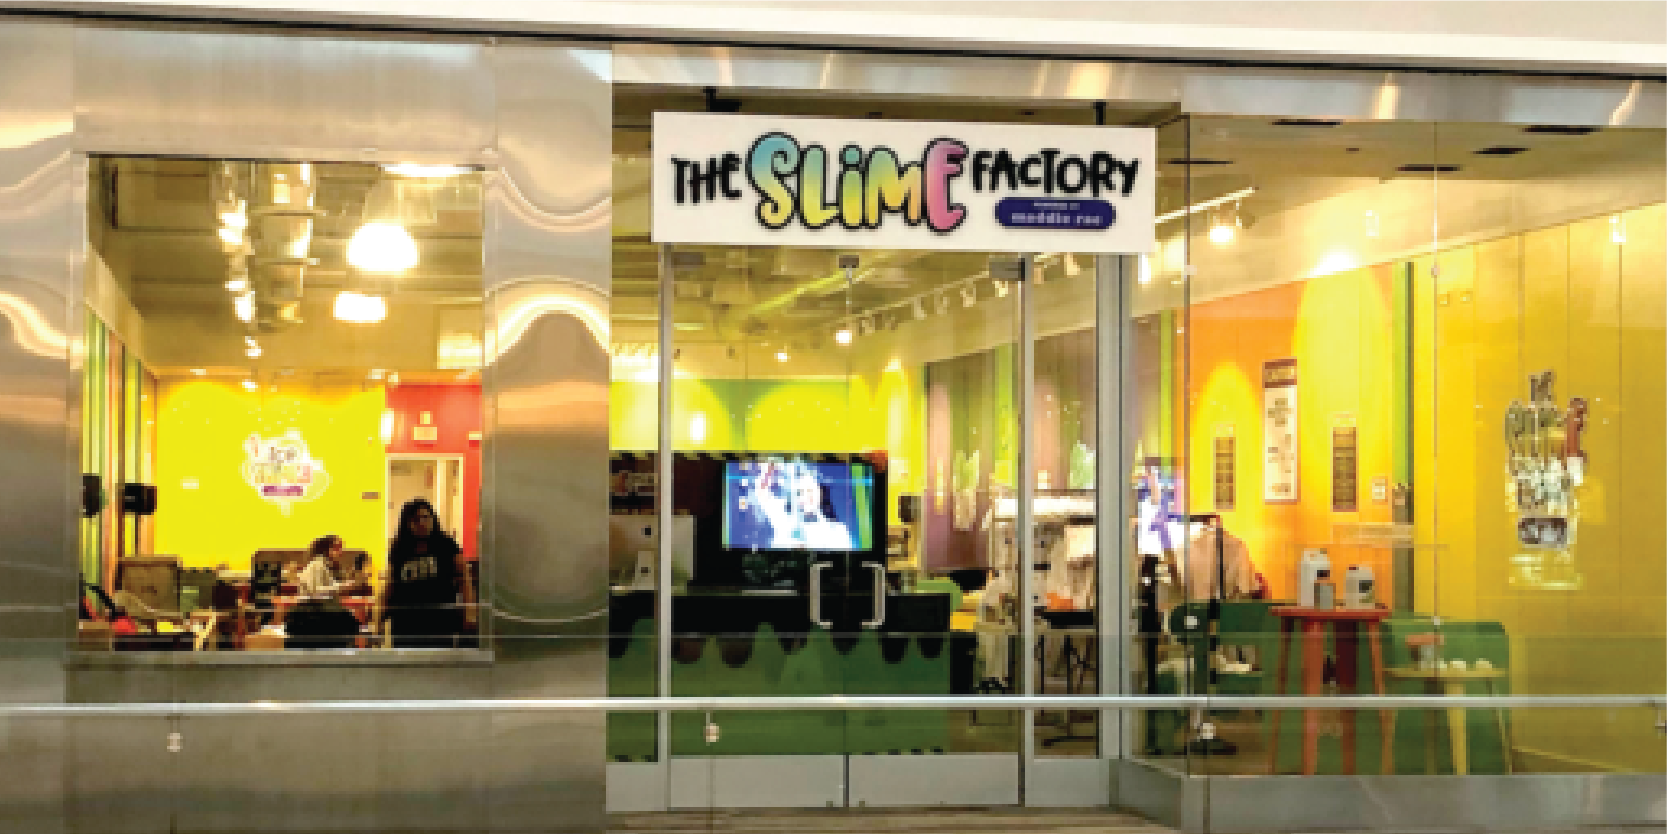 The Slime Factory Miami